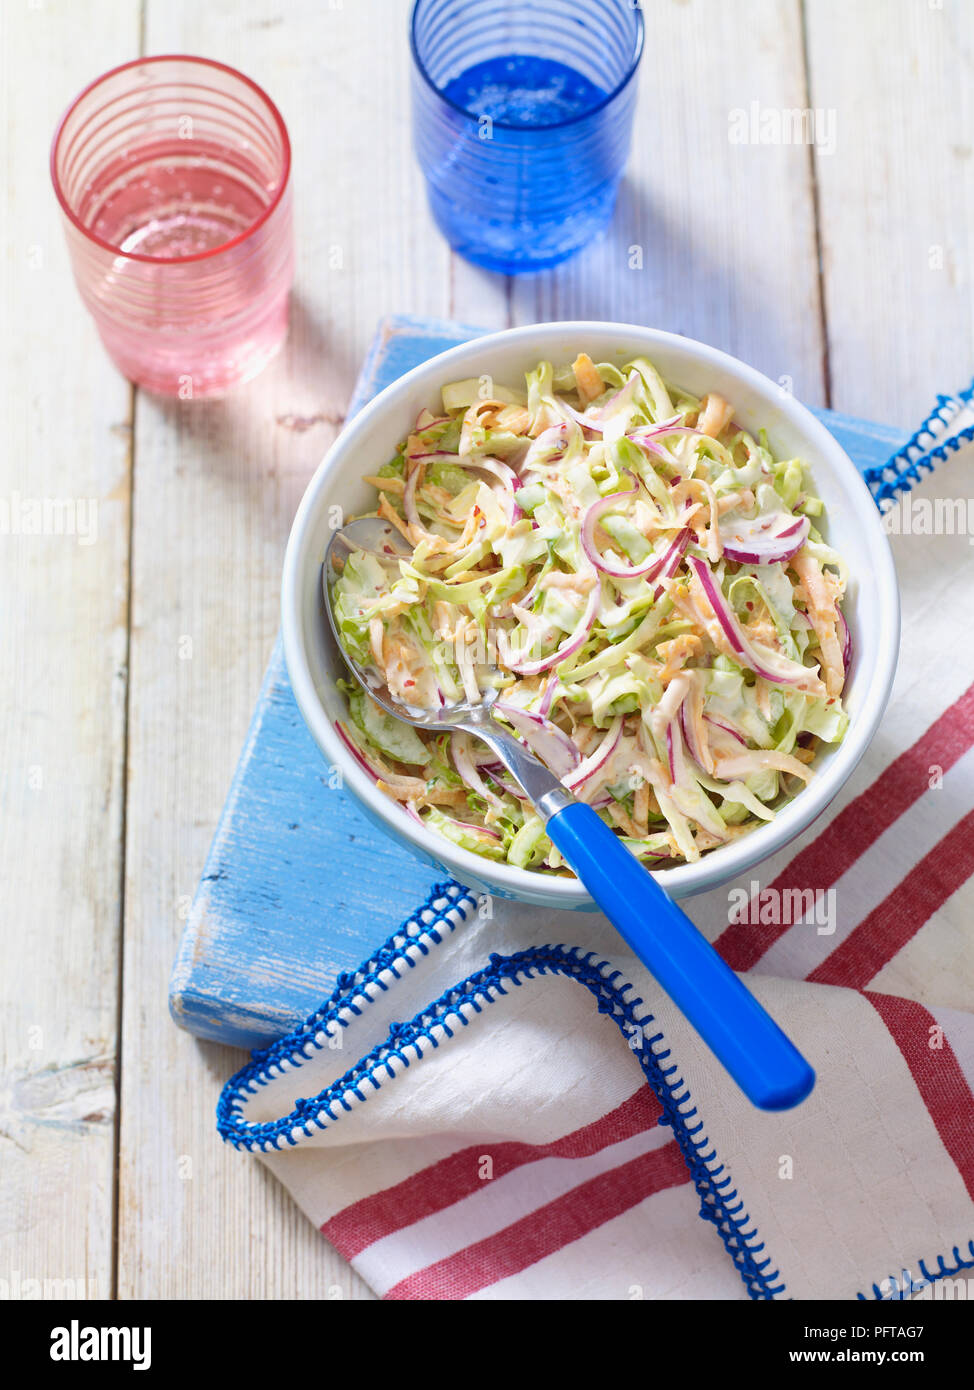 Coleslaw with red onions Stock Photo